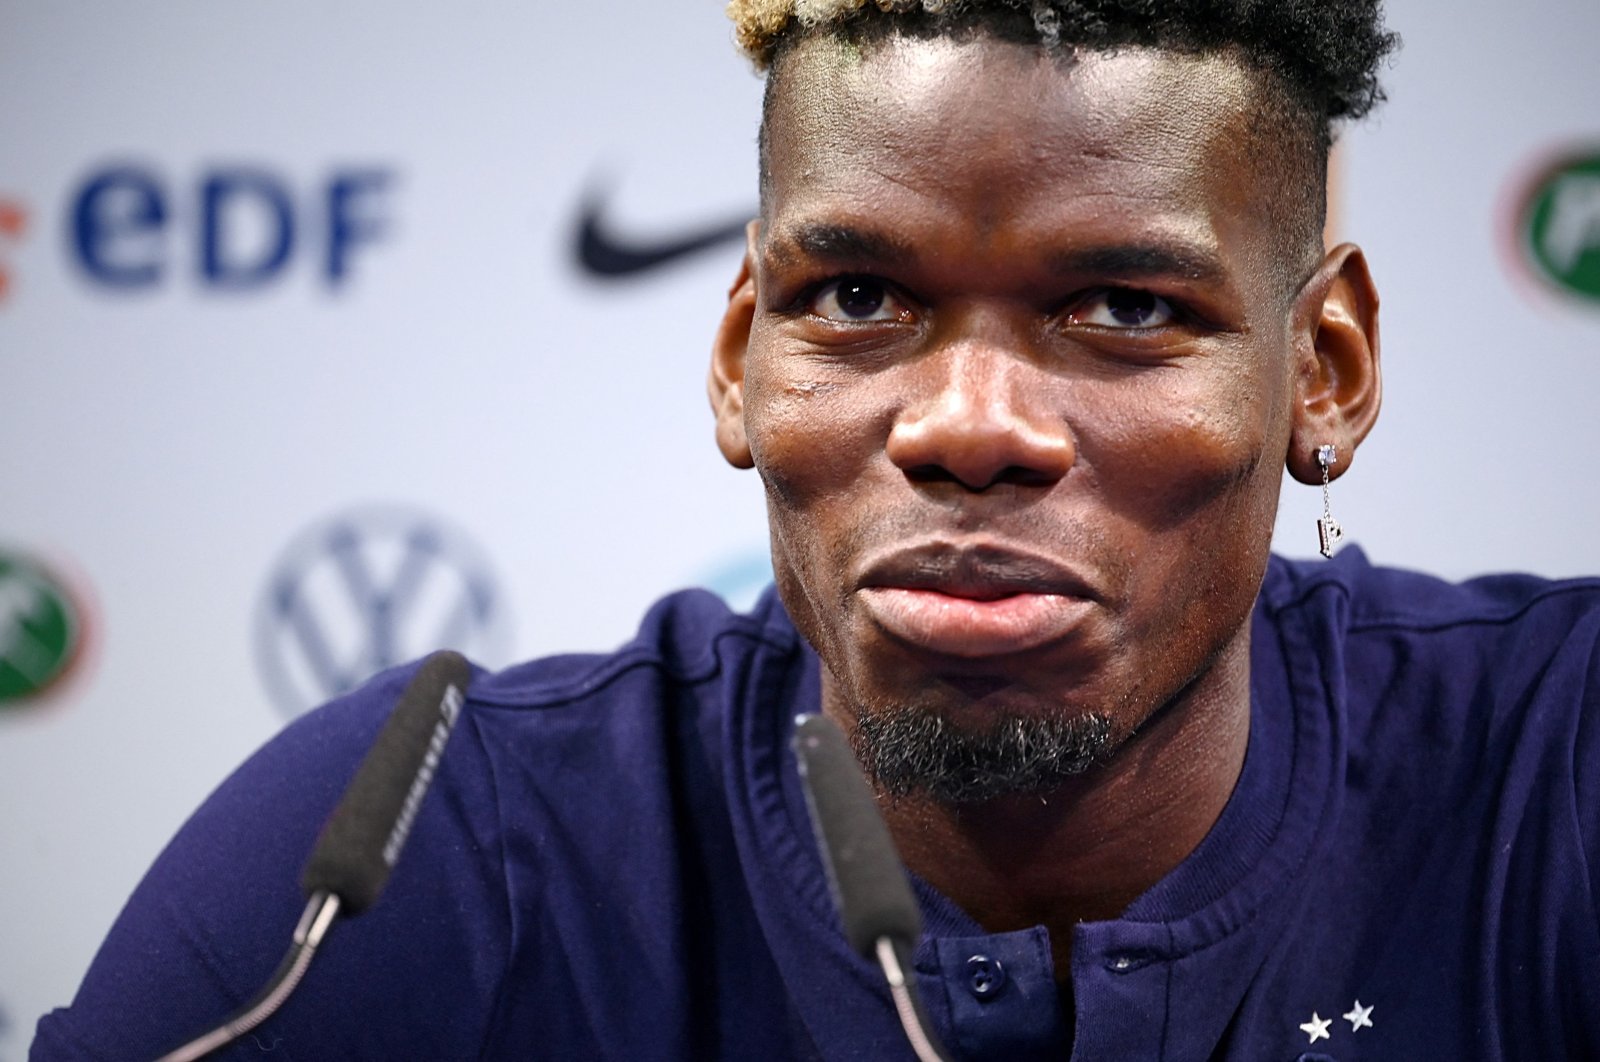 France's midfielder Paul Pogba speaks during a press conference at the team's base camp in Clairefontaine-en-Yvelines on June 10, 2021 ahead of the UEFA EURO 2020 football competition. (AFP Photo)